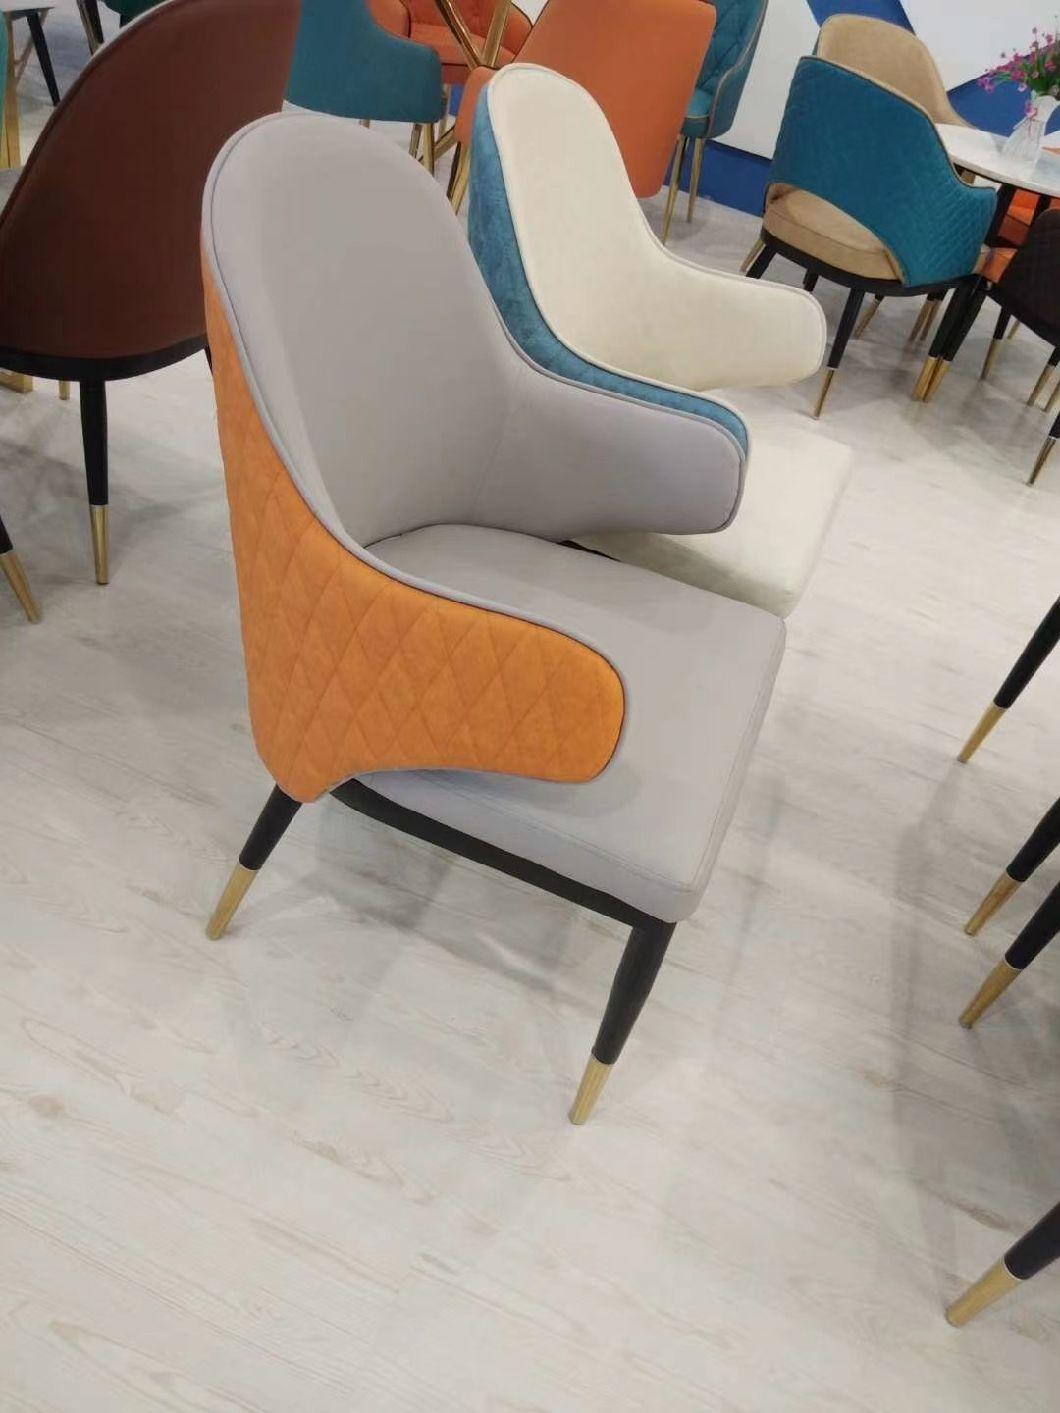 Fashionable PU Leatherlow Price Hotel Furniture Asian Cafe Chairs